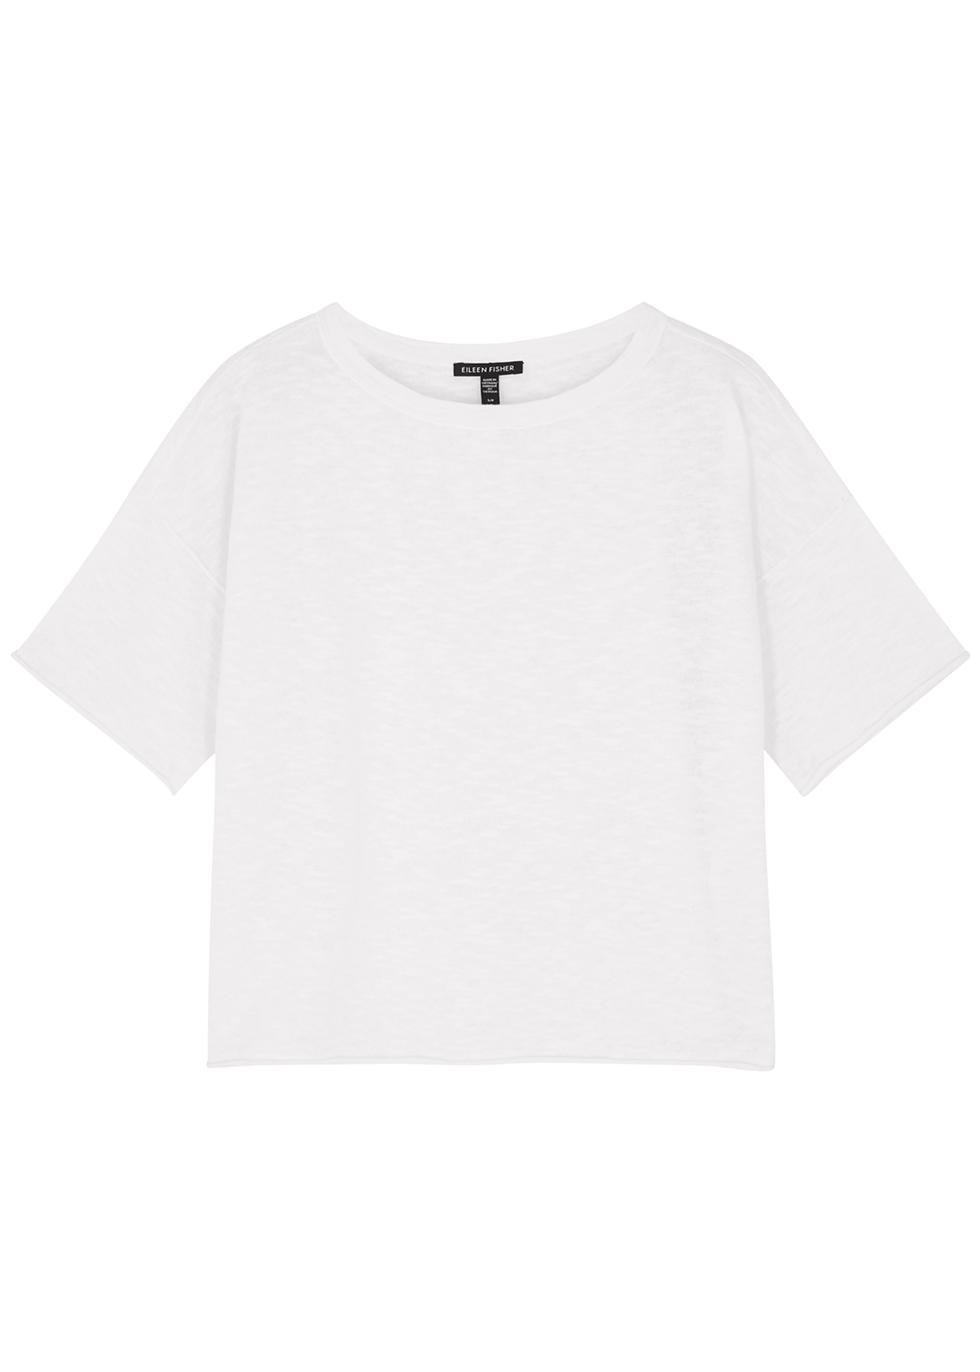 Linen and cotton-blend T-shirt by EILEEN FISHER